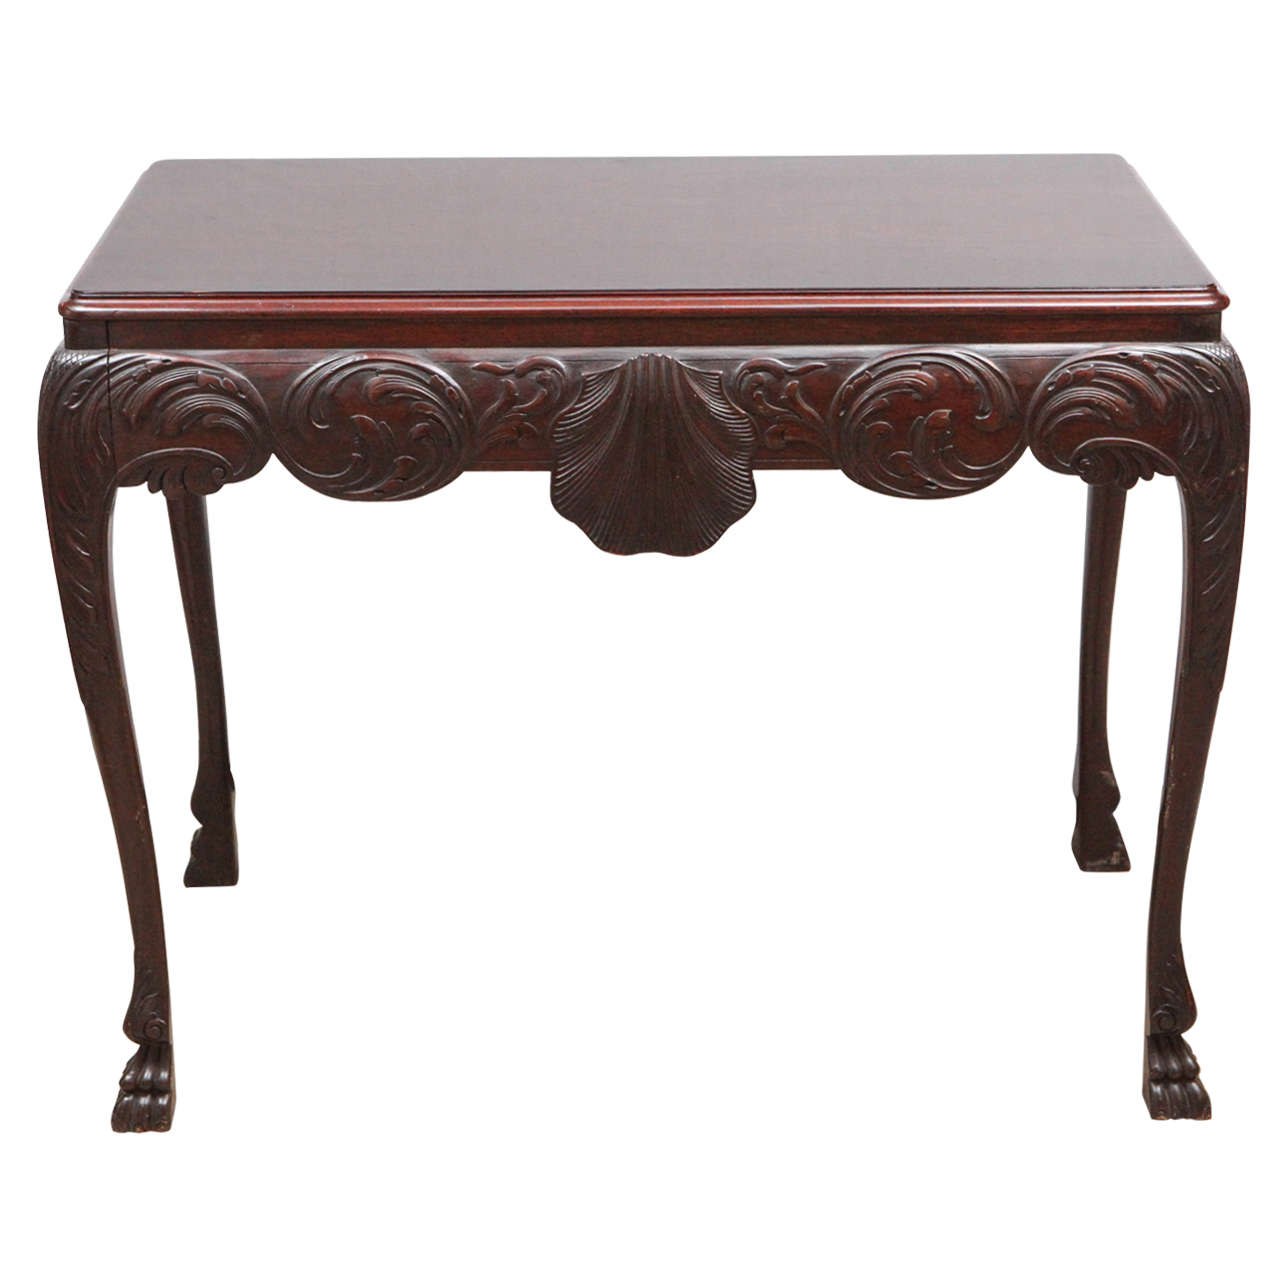 19th Century English Mahogany Console Table with Single Drawer